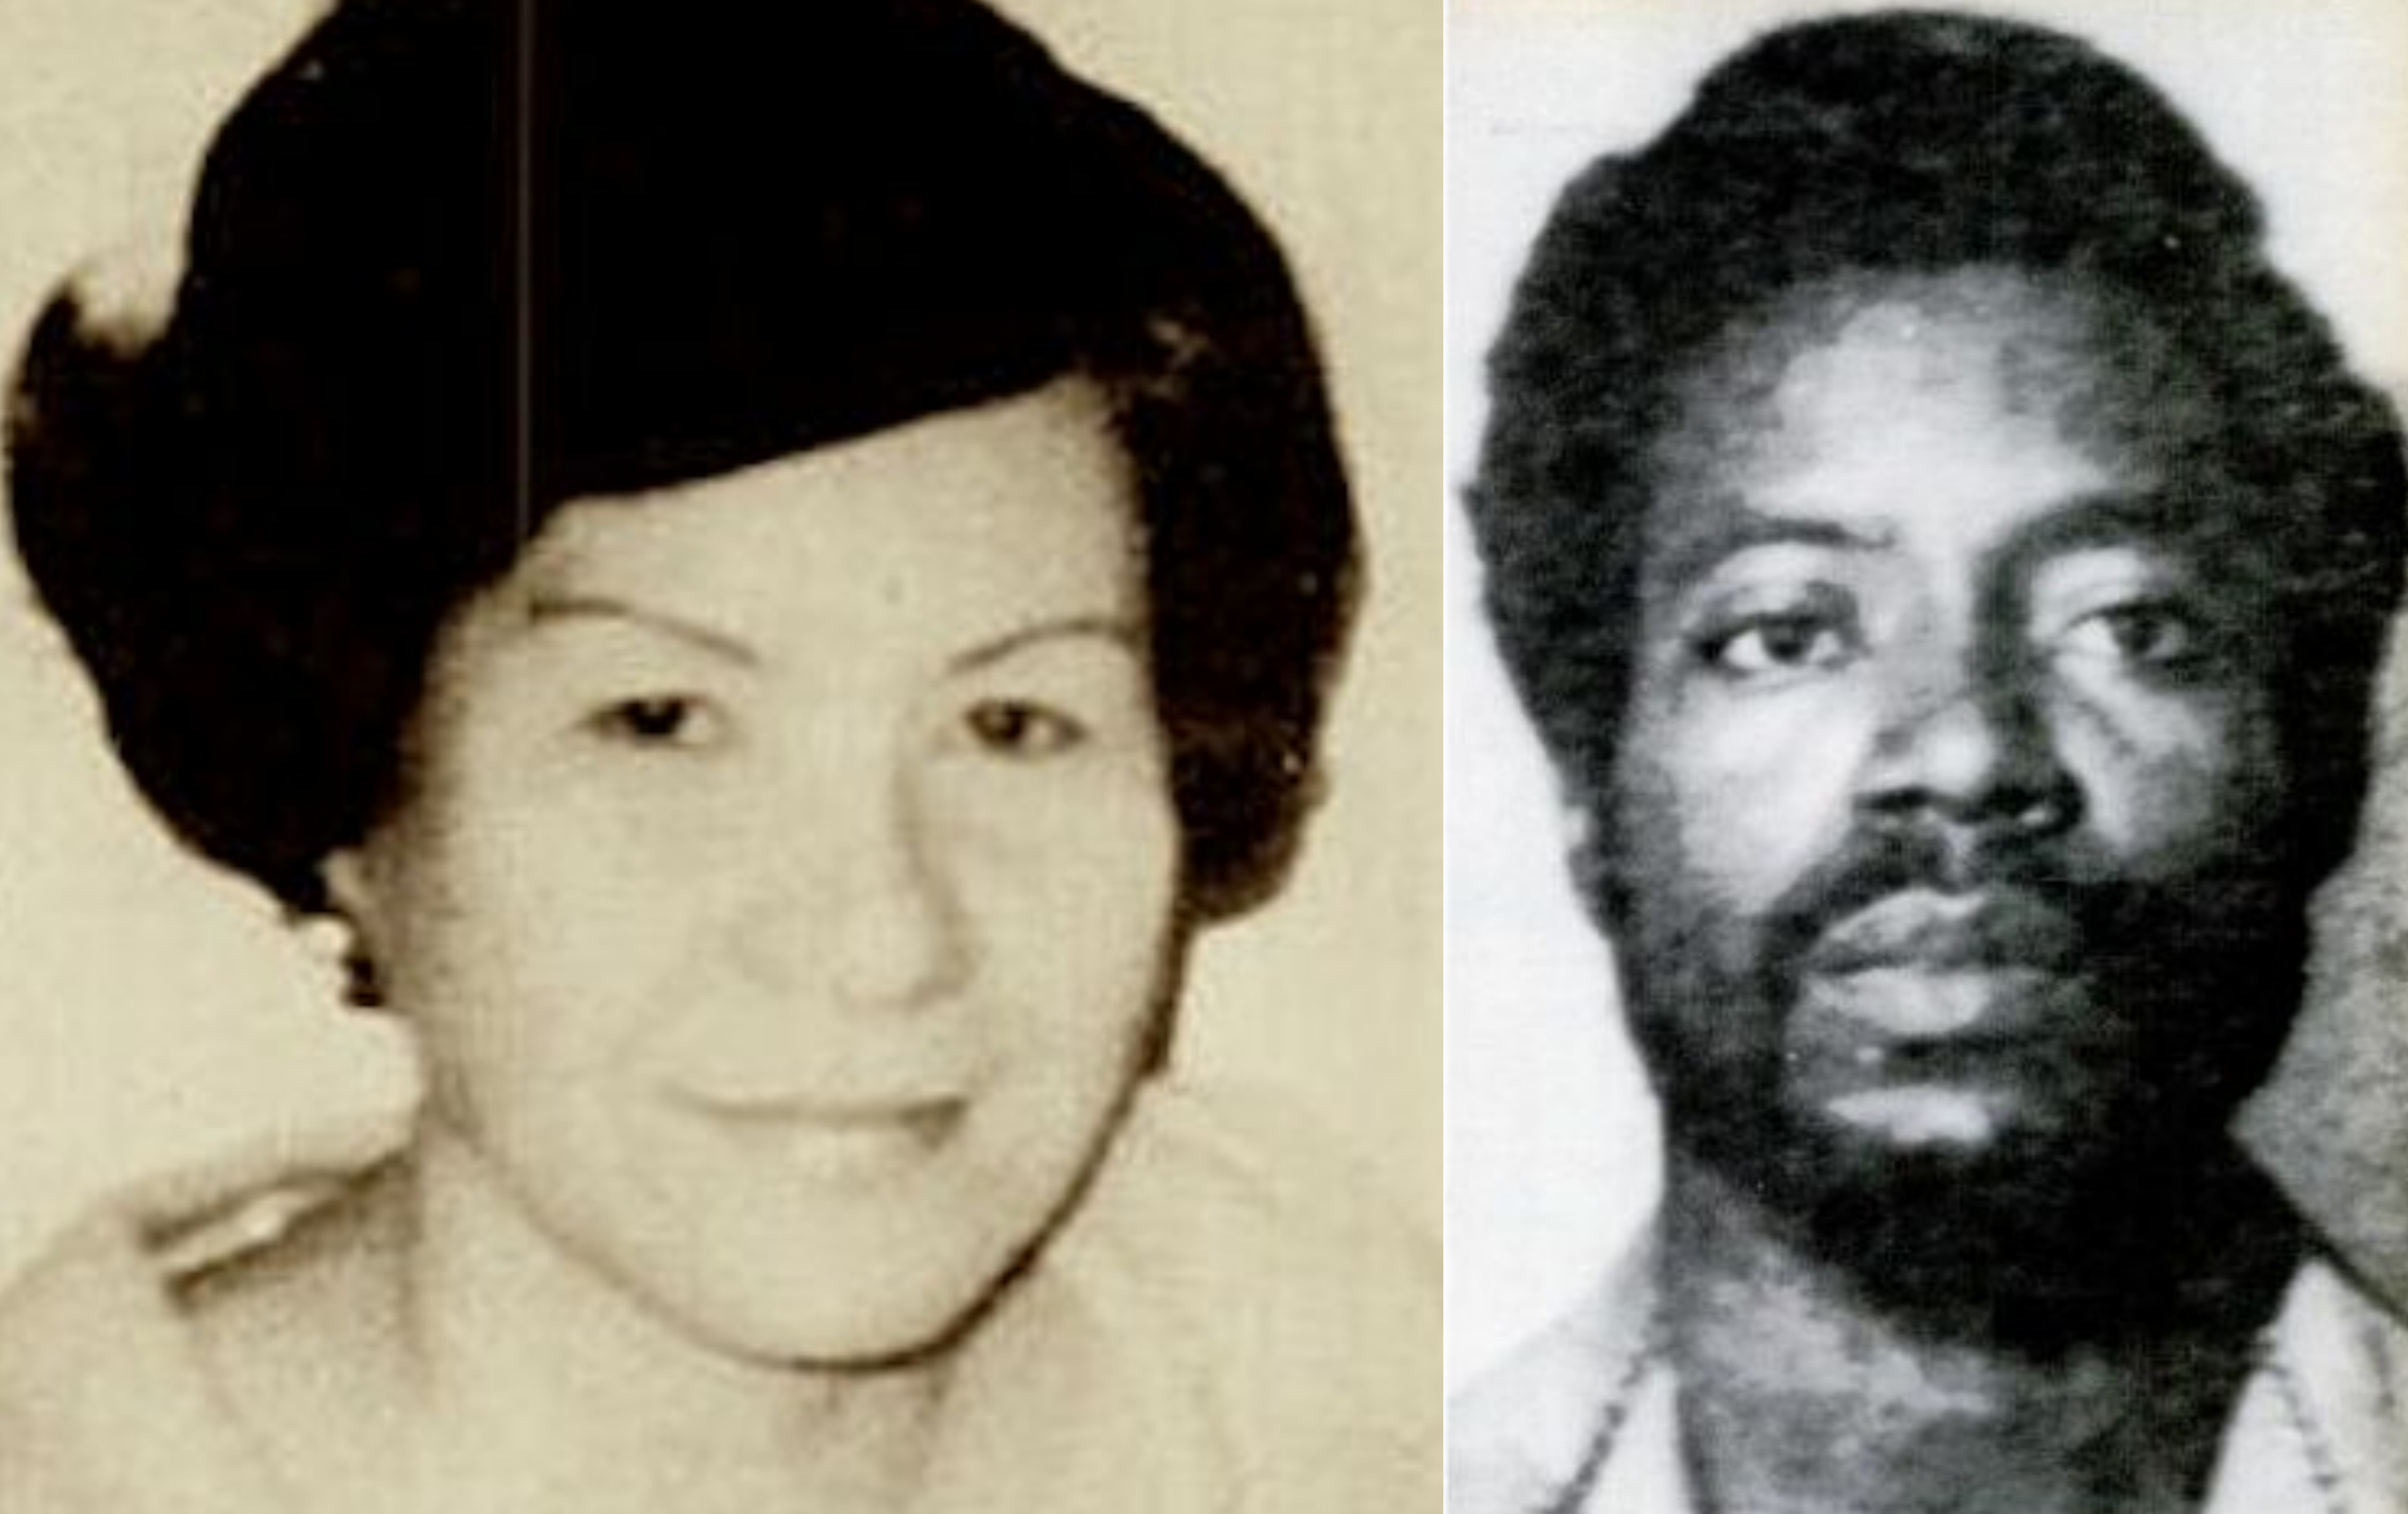 Teresita Basa:

Teresita Basa was murdered by one of her coworkers in 1976, by stabbing her and setting her body on fire. However there was never any evidence if only a little which linked Teresita’s killer, Allen Showery, to her death. Actually, the only eye witness account of the murder was from that of Basa herself, whom appeared to Remy Chua as ghost late one night in the same hospital where Basa worked. After having her first encounter, Chau began acting rather strange, as she started singing songs she never knew and once even came to Basa’s family, speaking in Teresita’s own voice, she named Showery as her killer. After a police investigation, Showery’s home was searched and many of Basa’s personal items where found, which lead Showery to confess to the murder. To this day, no one can explain how or why Remy Chua was chosen to help solve the murder of Teresita Basa. 